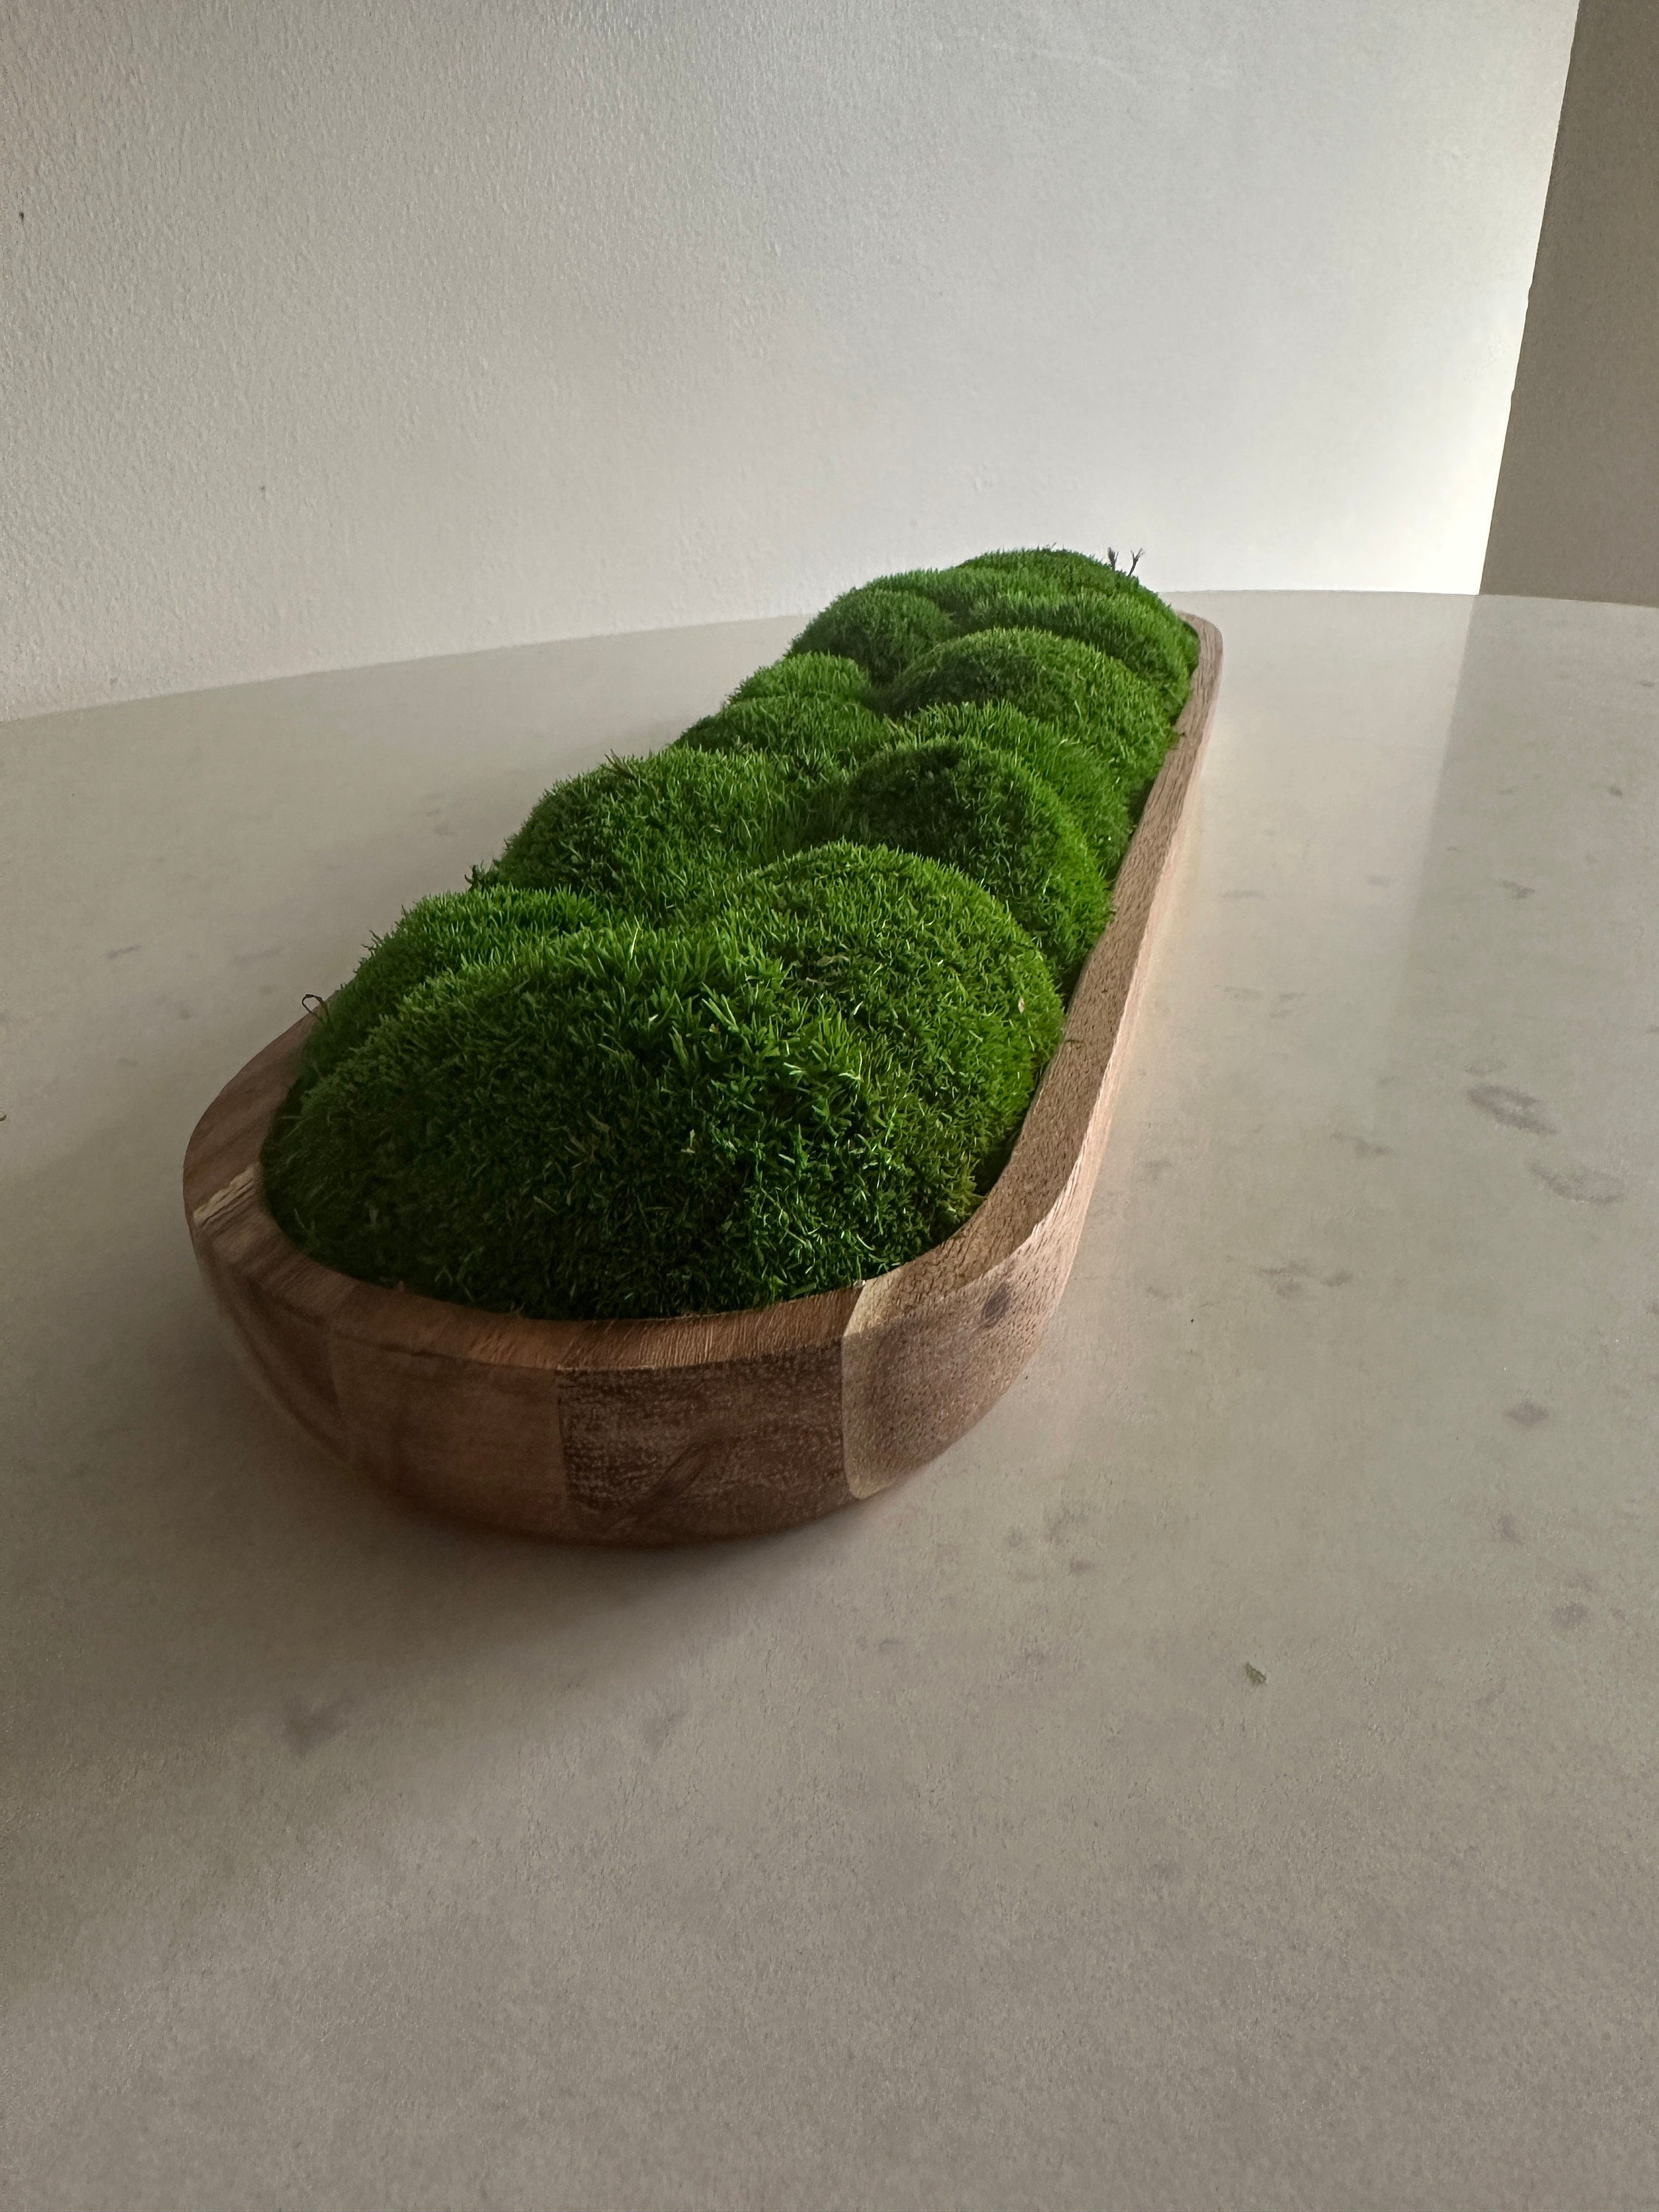 Rustic Wood Moss Bowl Centerpiece Preserved Moss Arrangement Pedestal Bowl  for Dining Table Enchanted Table Office Decor Client Boho Gift 